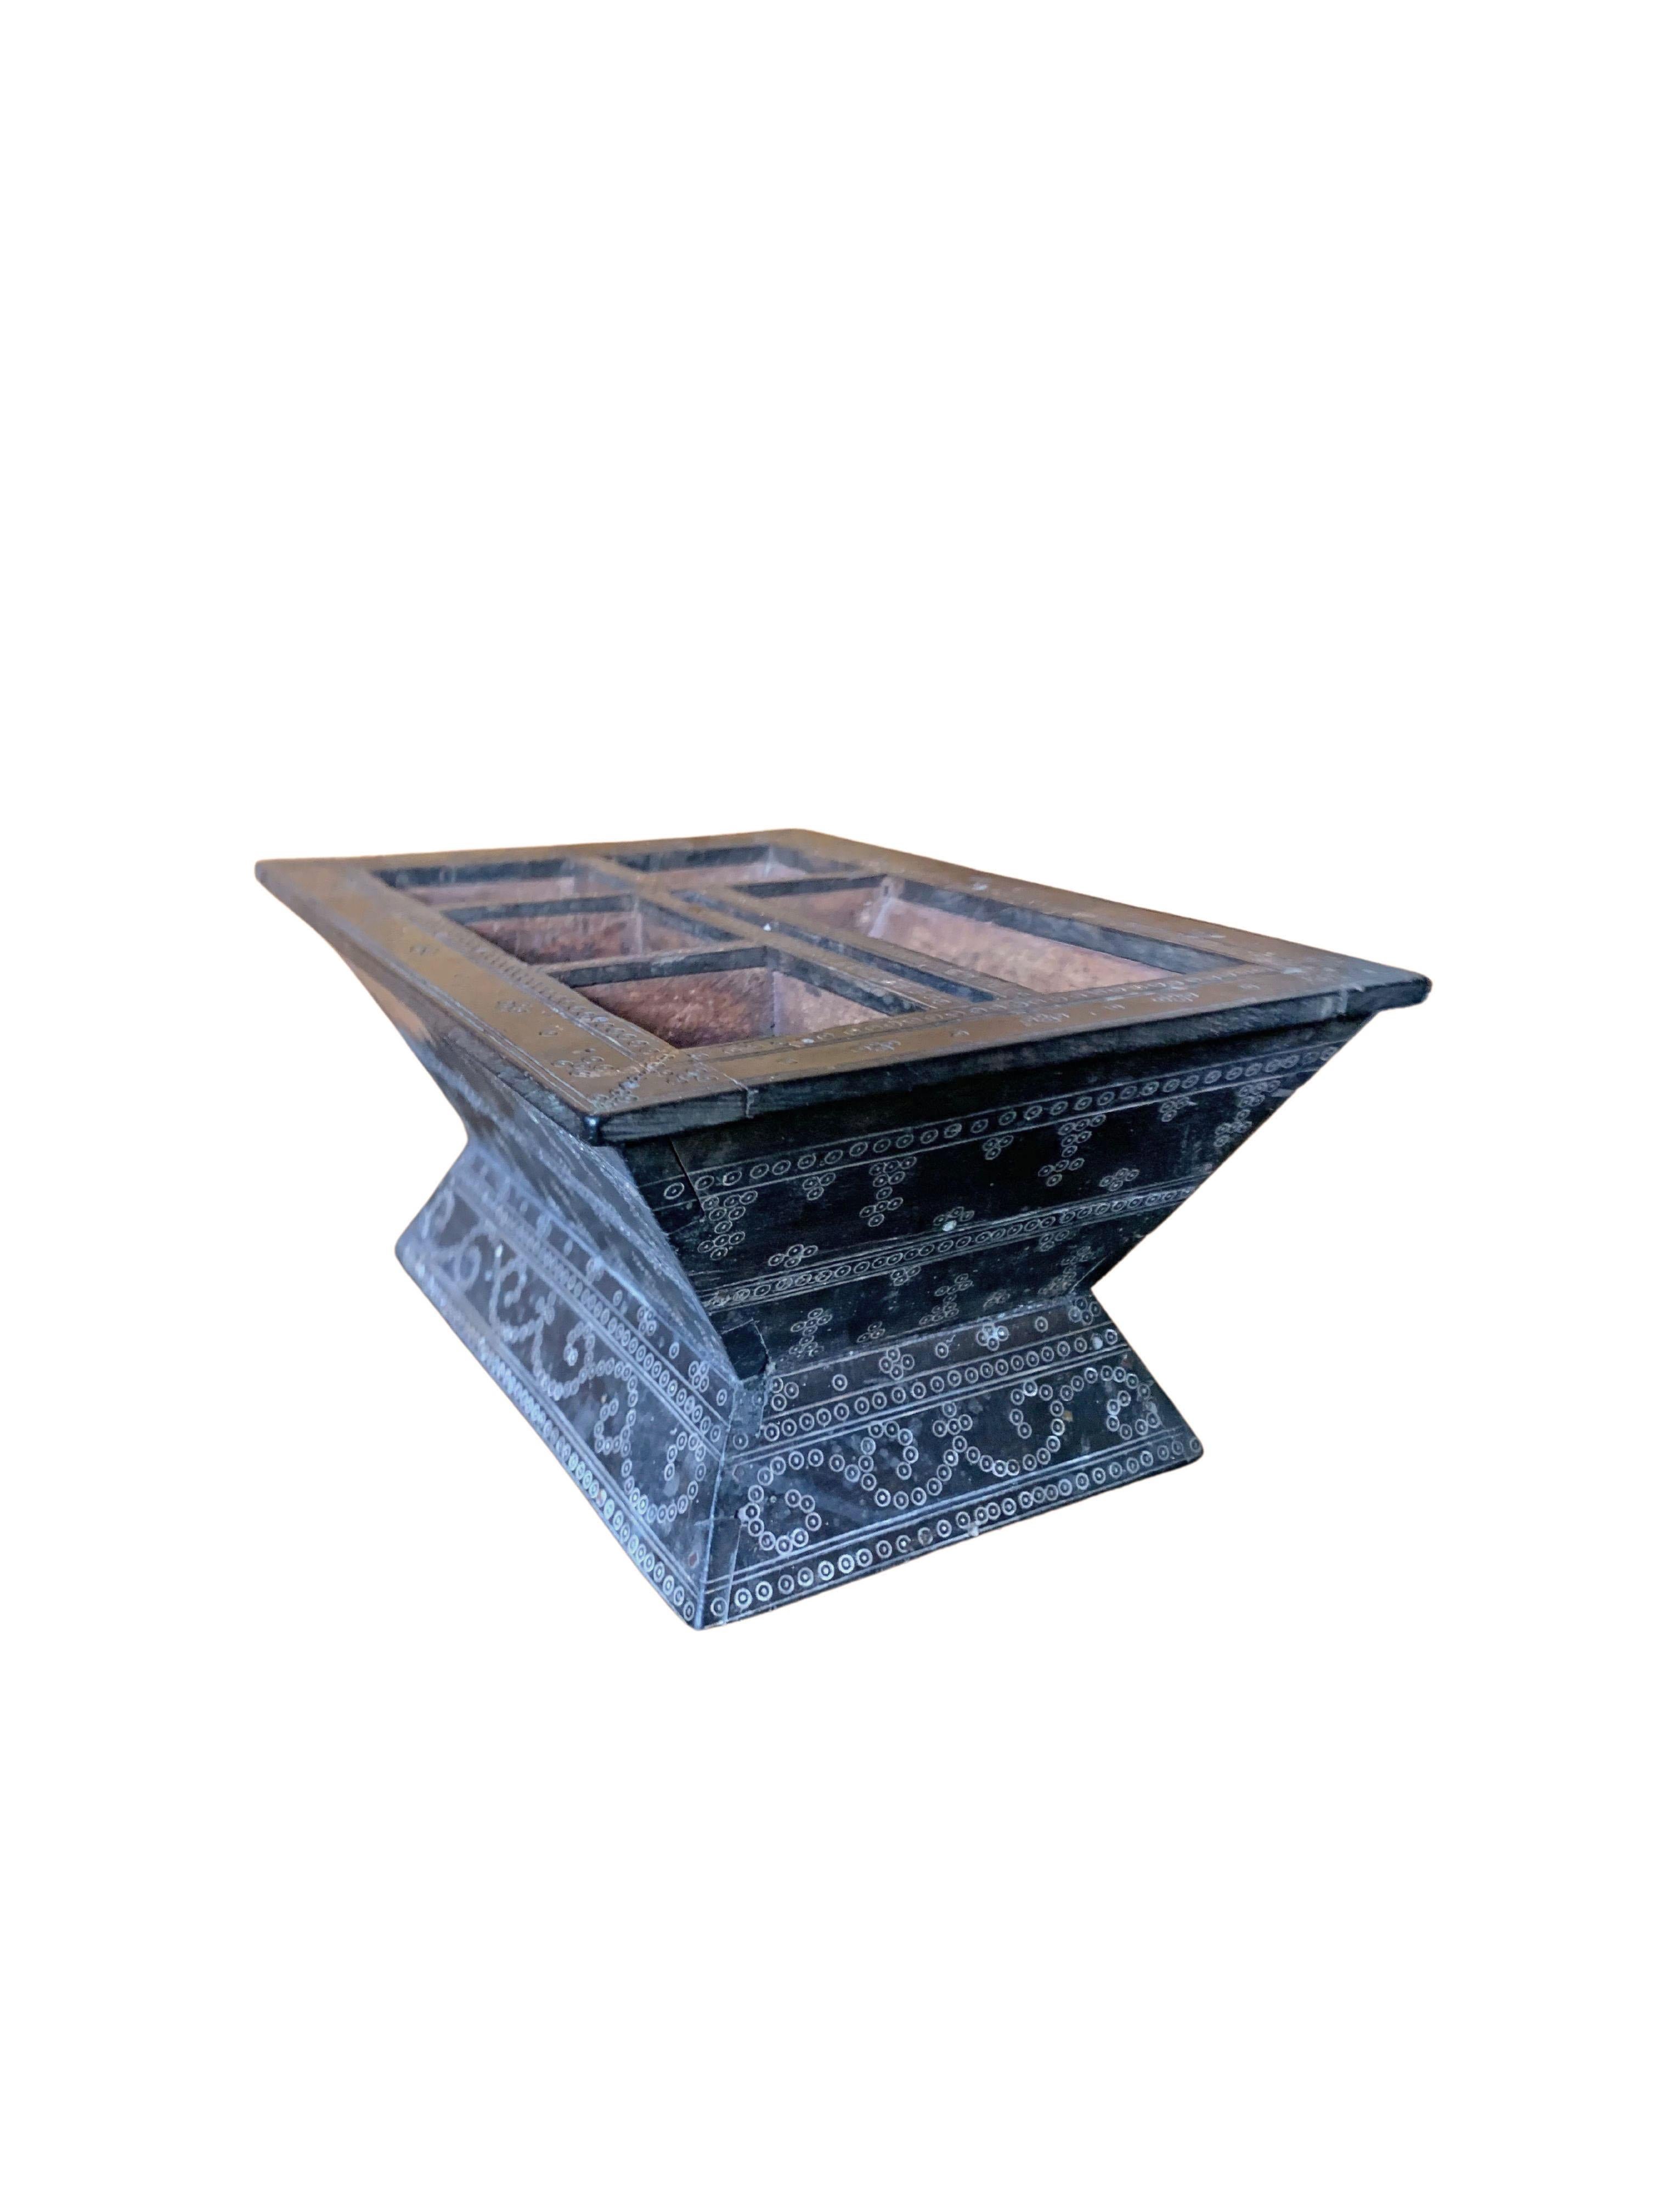 Betel Nut Box from Sumba Island with Tribal Engravings, Indonesia, c. 1950 For Sale 1